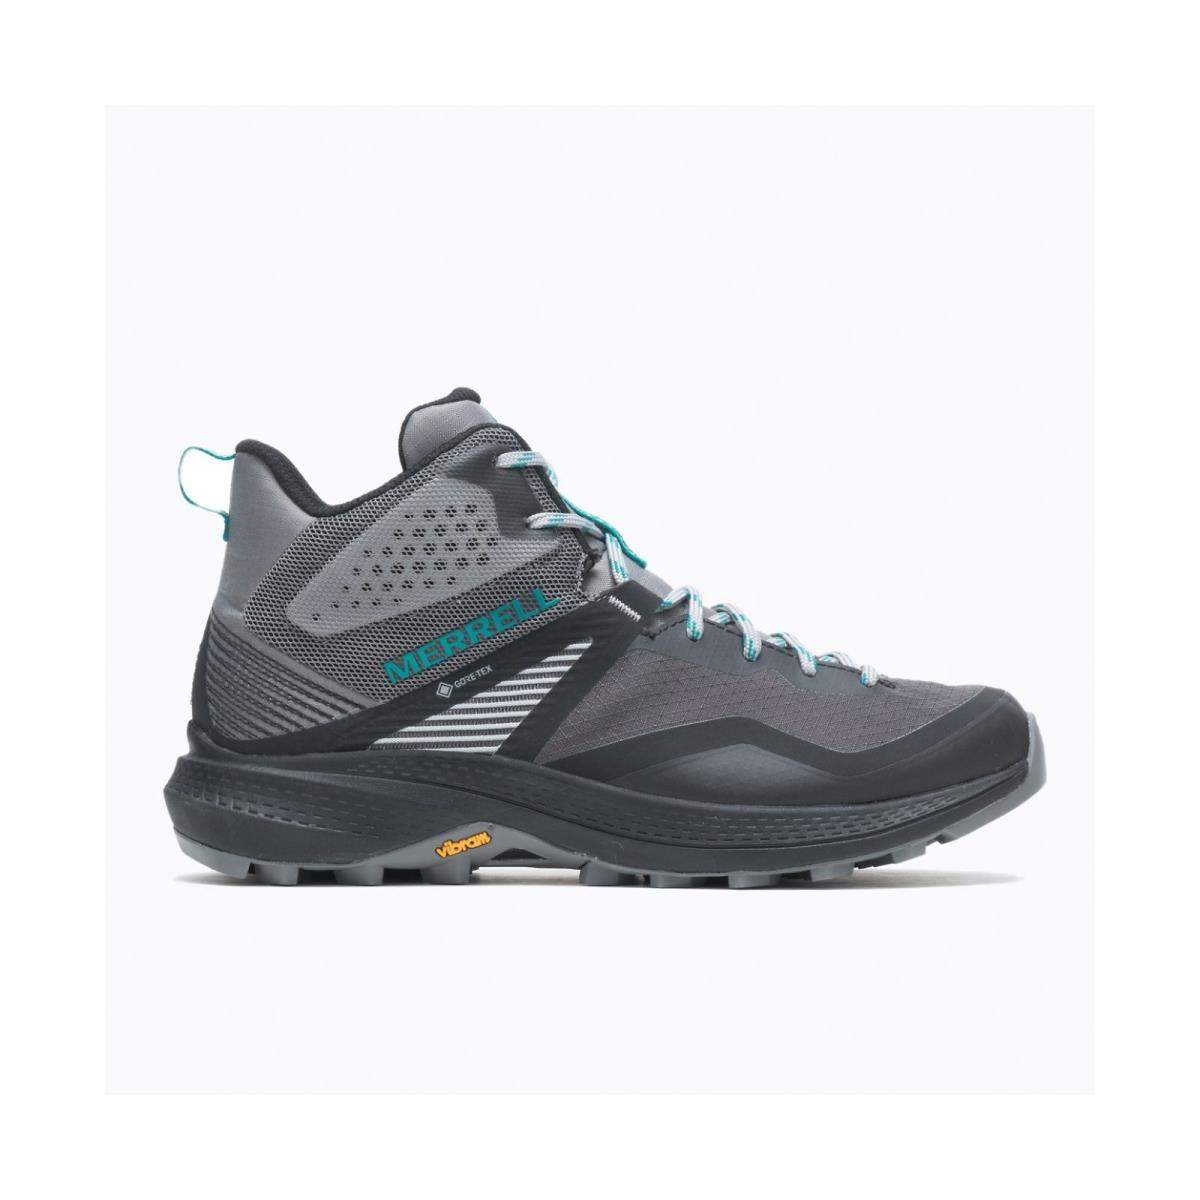 Merrell Women`s Waterproof Gore-tex Breathable Mesh Hiker Boots Removable Insole CHARCOAL/TEAL